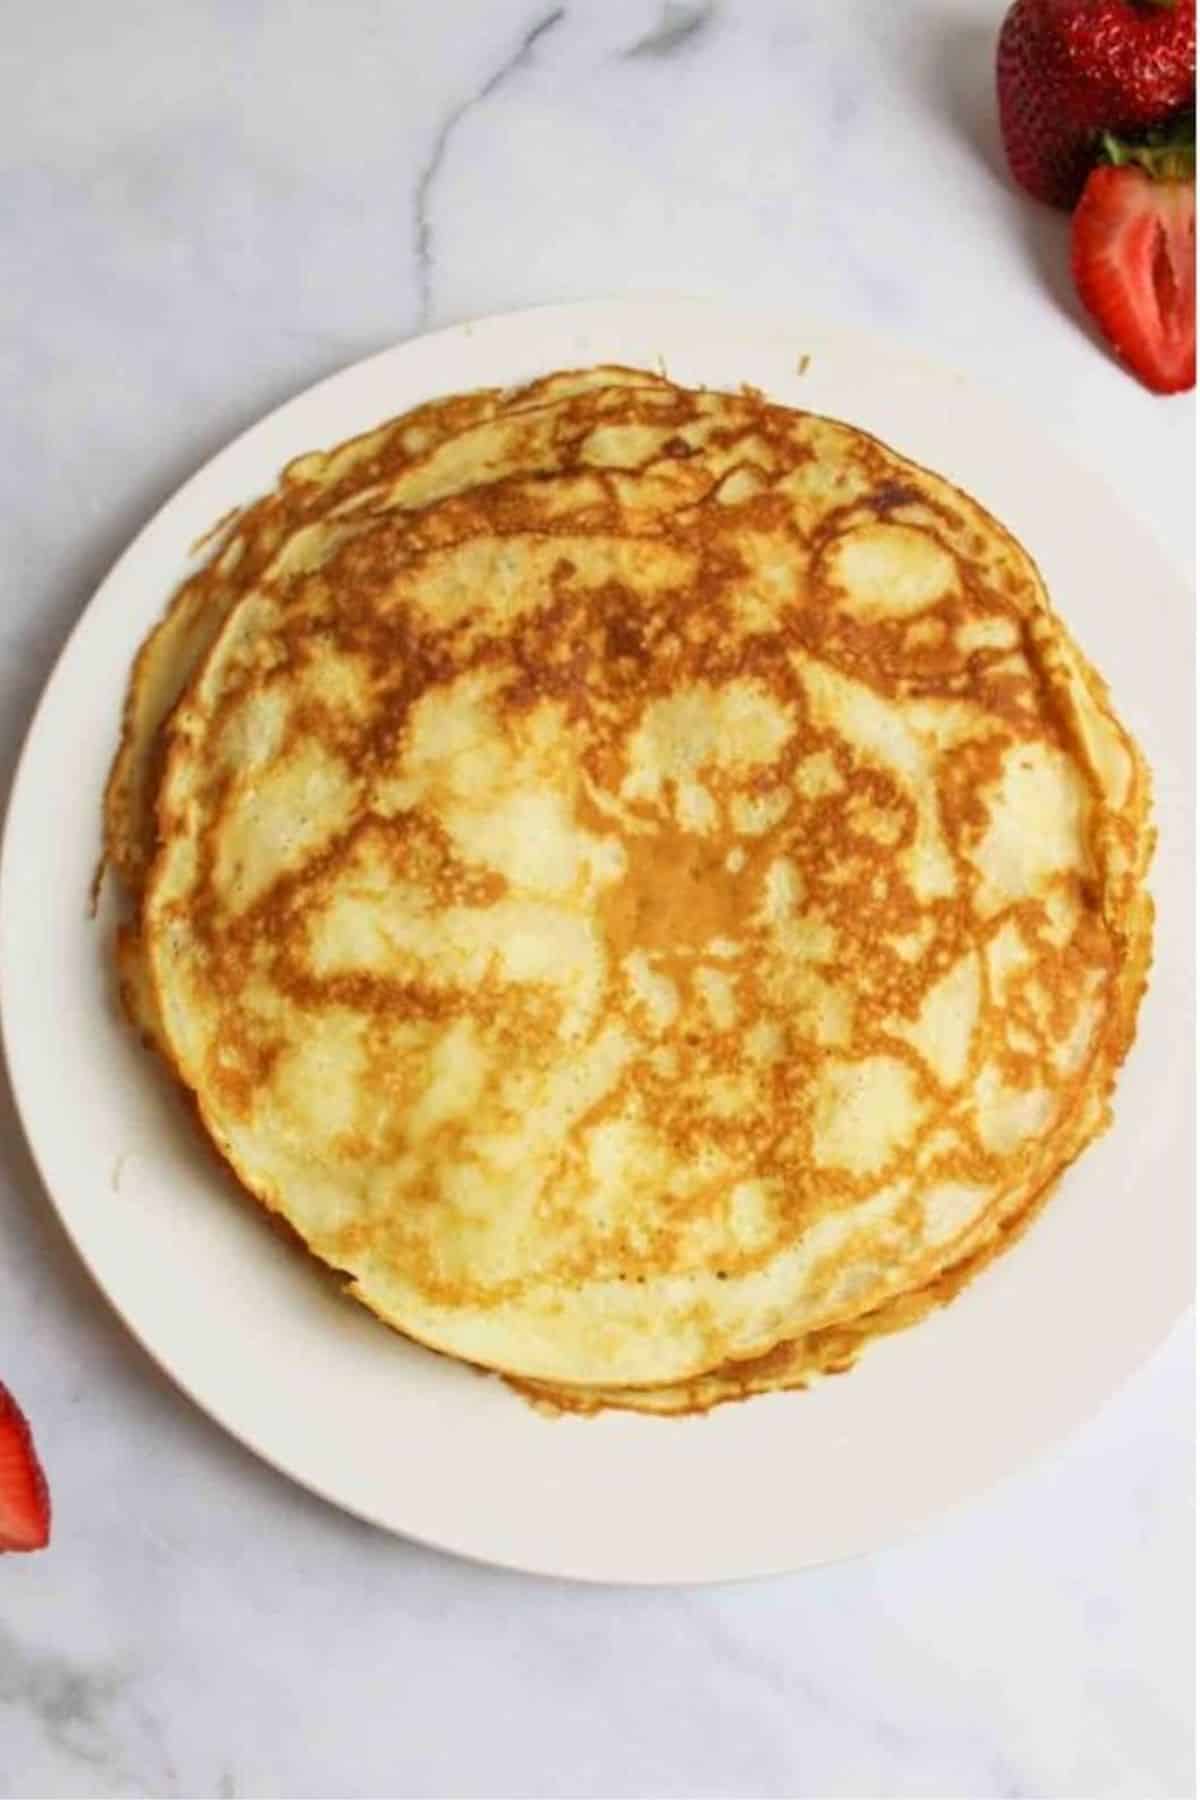 stack of crepes made with pancake mix